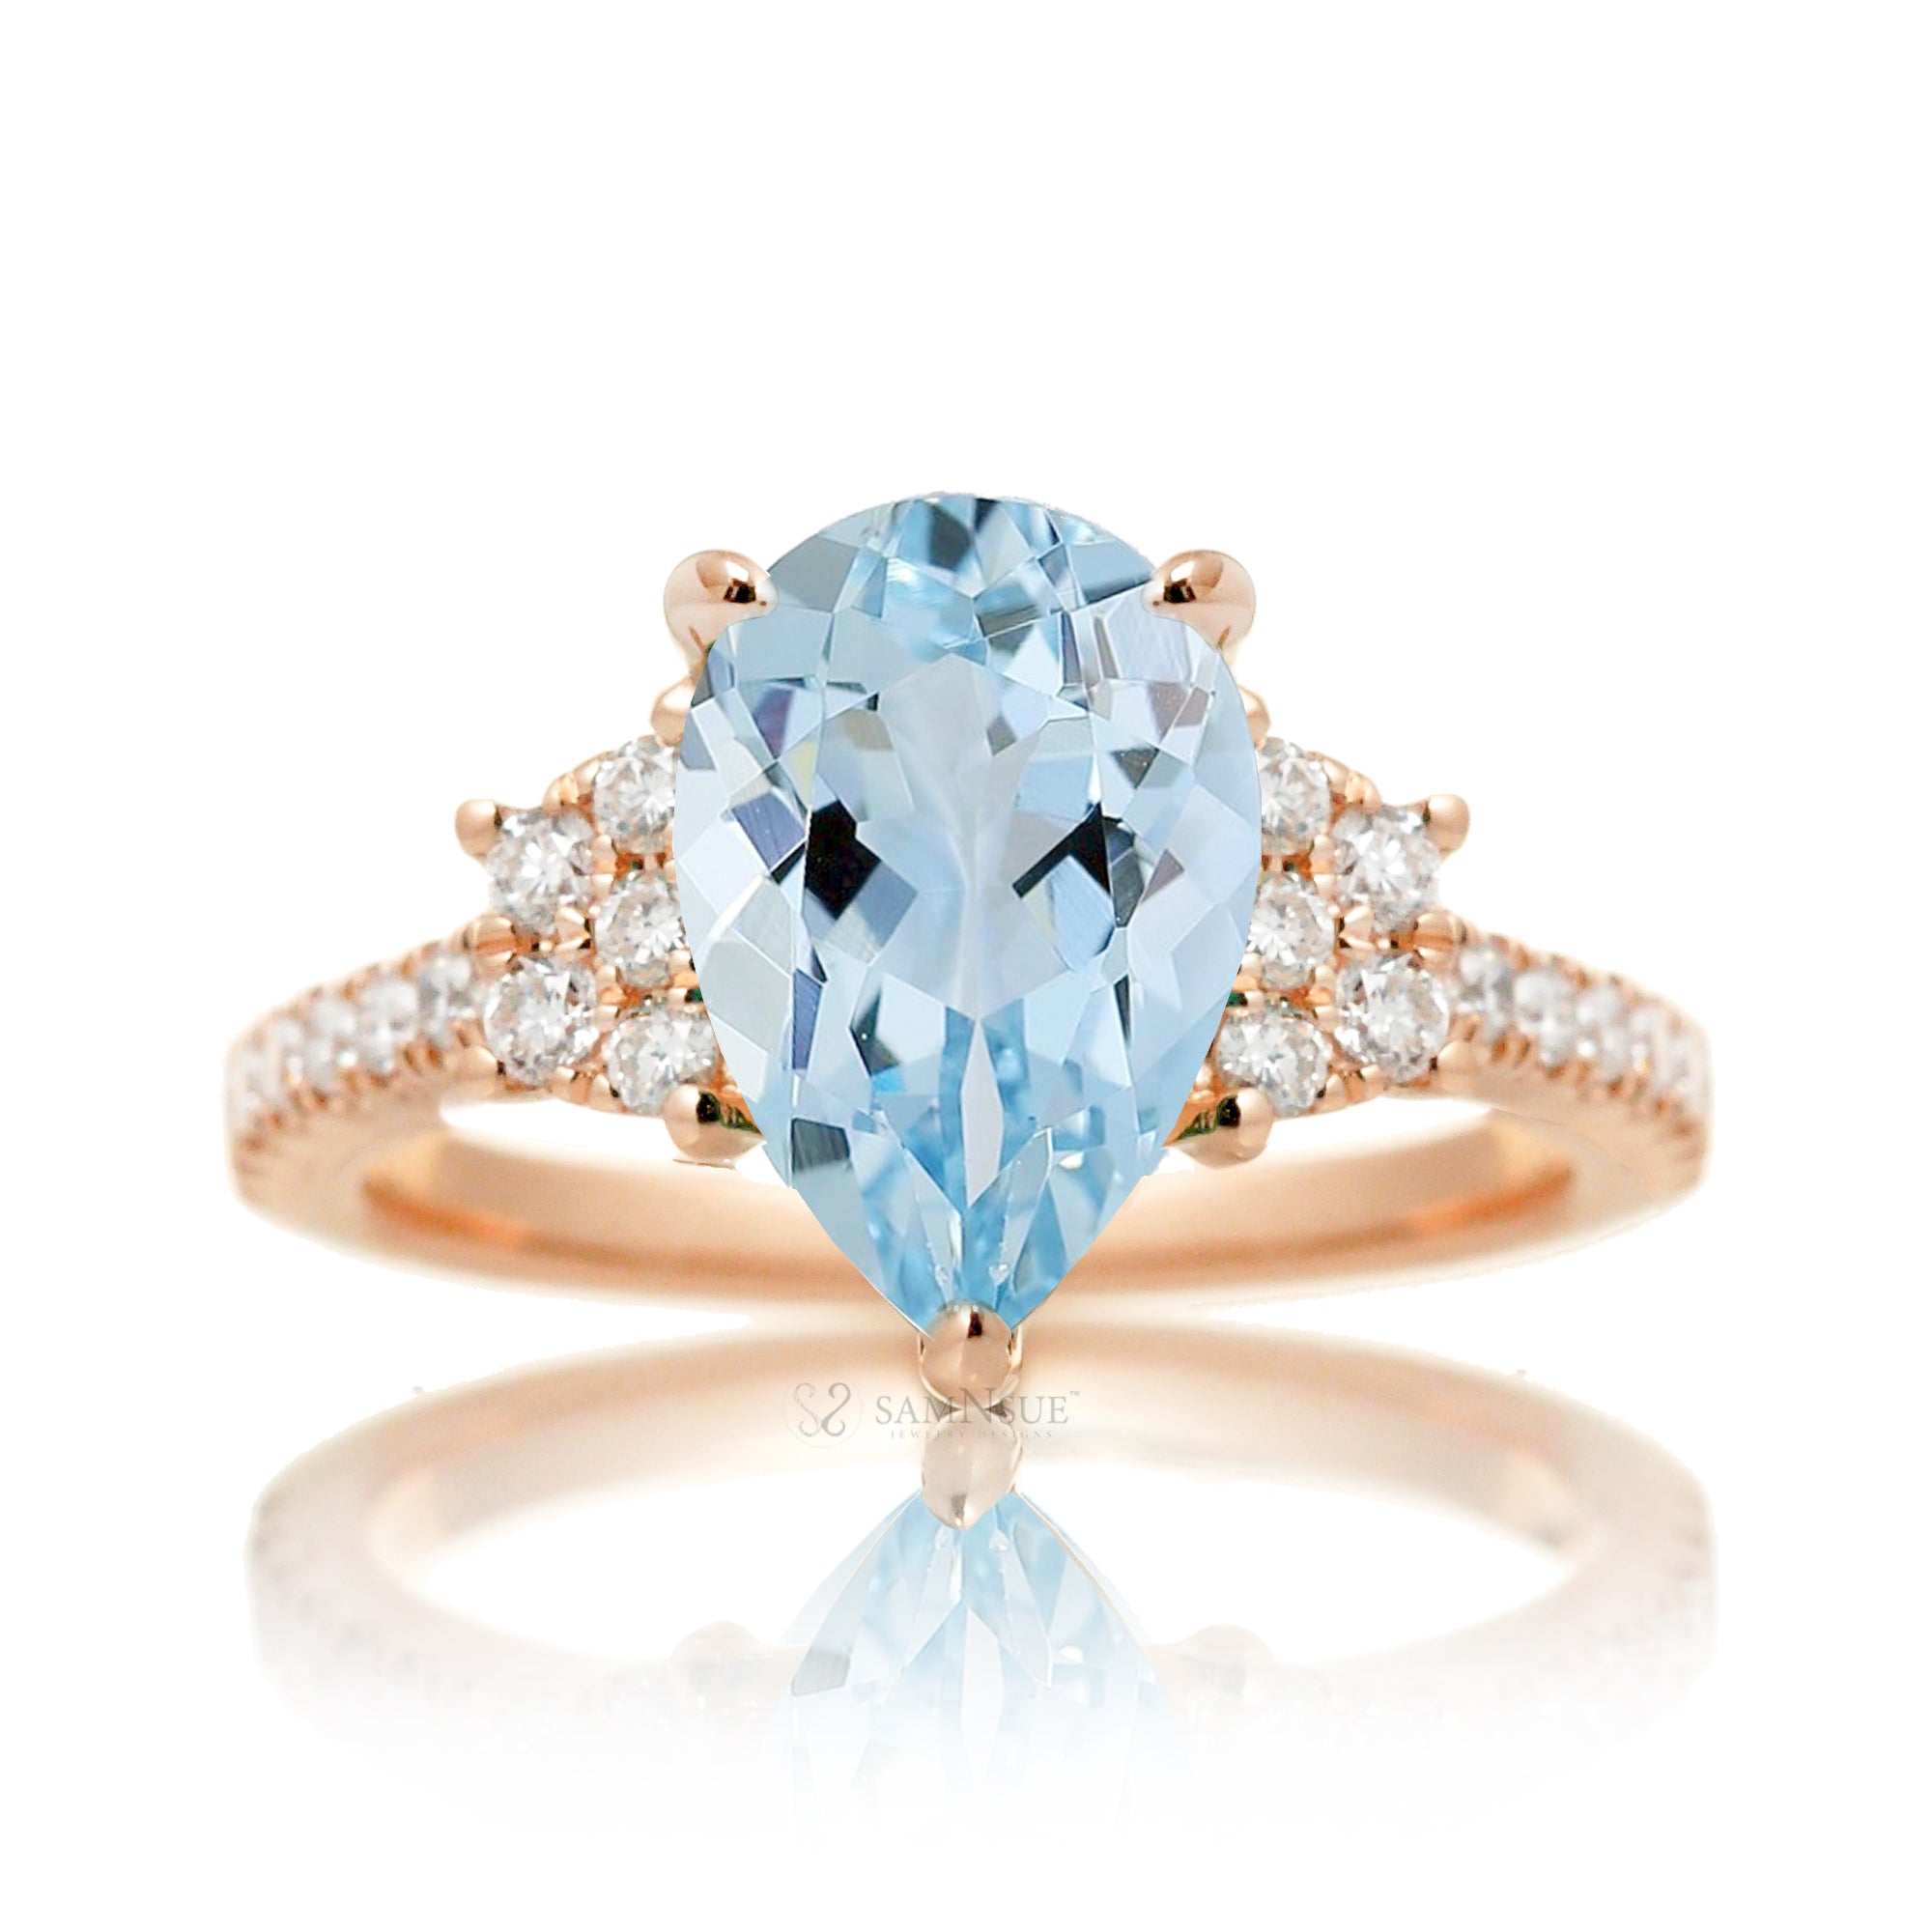 Pear aquamarine with diamond accent on the band and trapezoid shape side stones rose gold